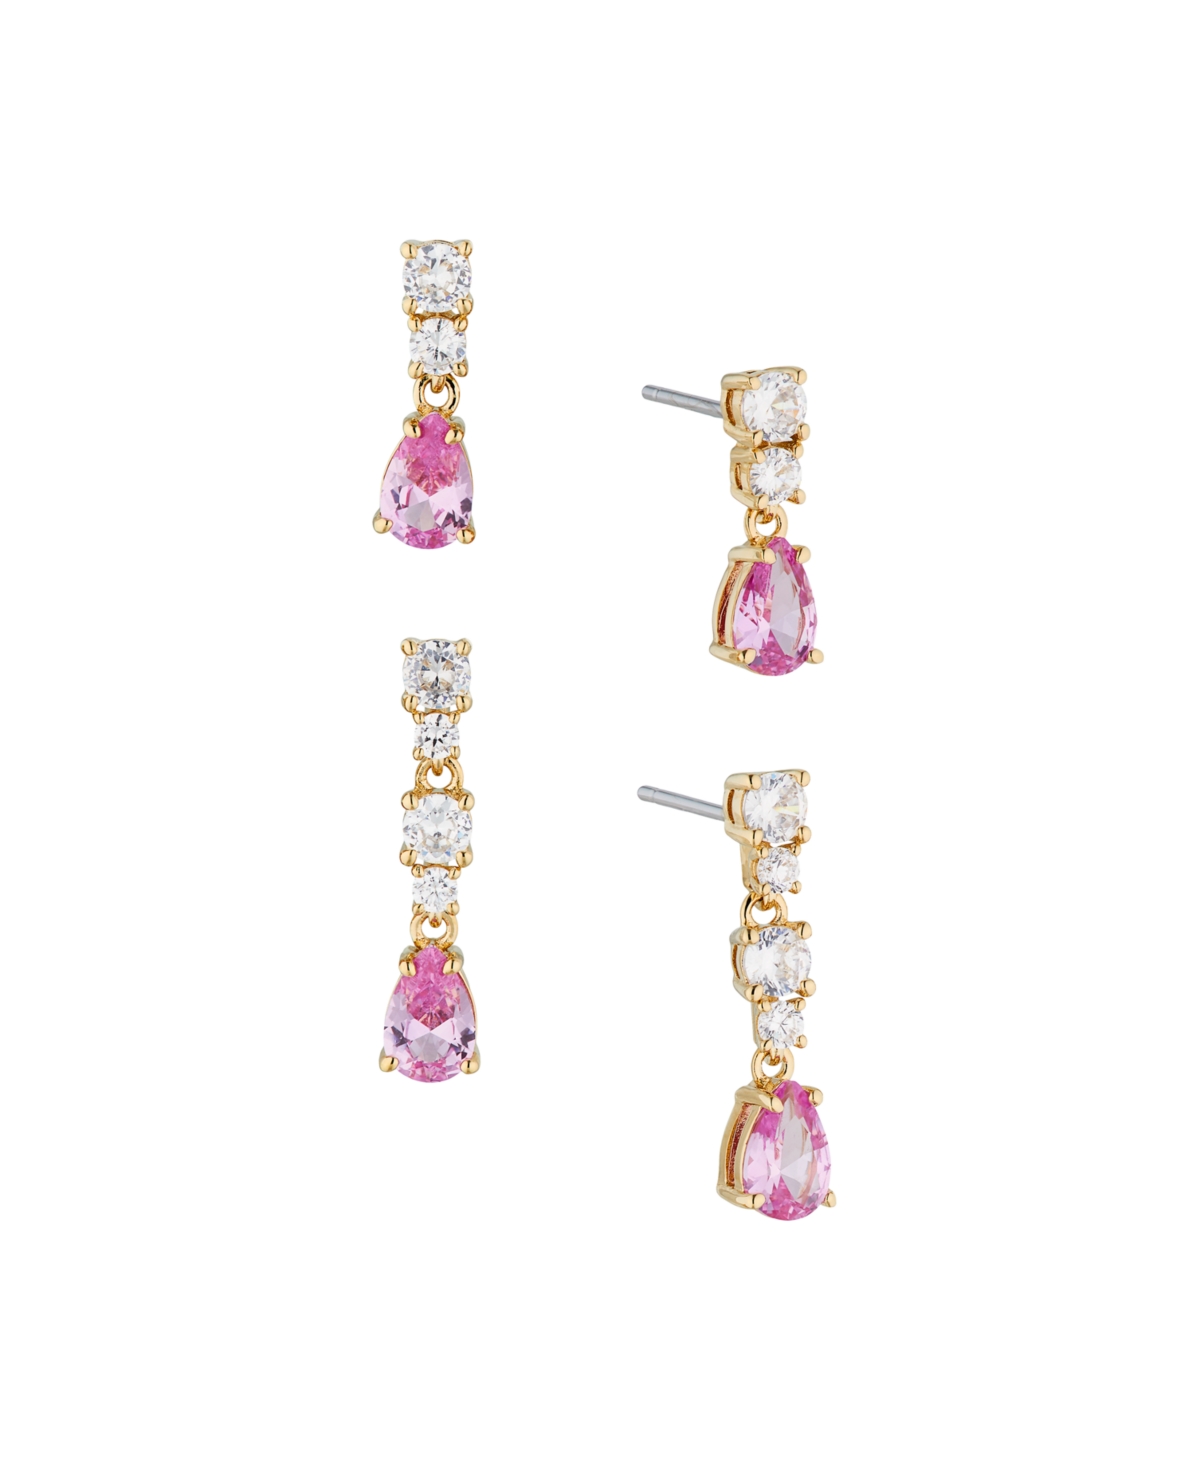 Eliot Danori Cubic Zirconia Linear and Drop Set Two Pair of Earrings (4 Pieces)